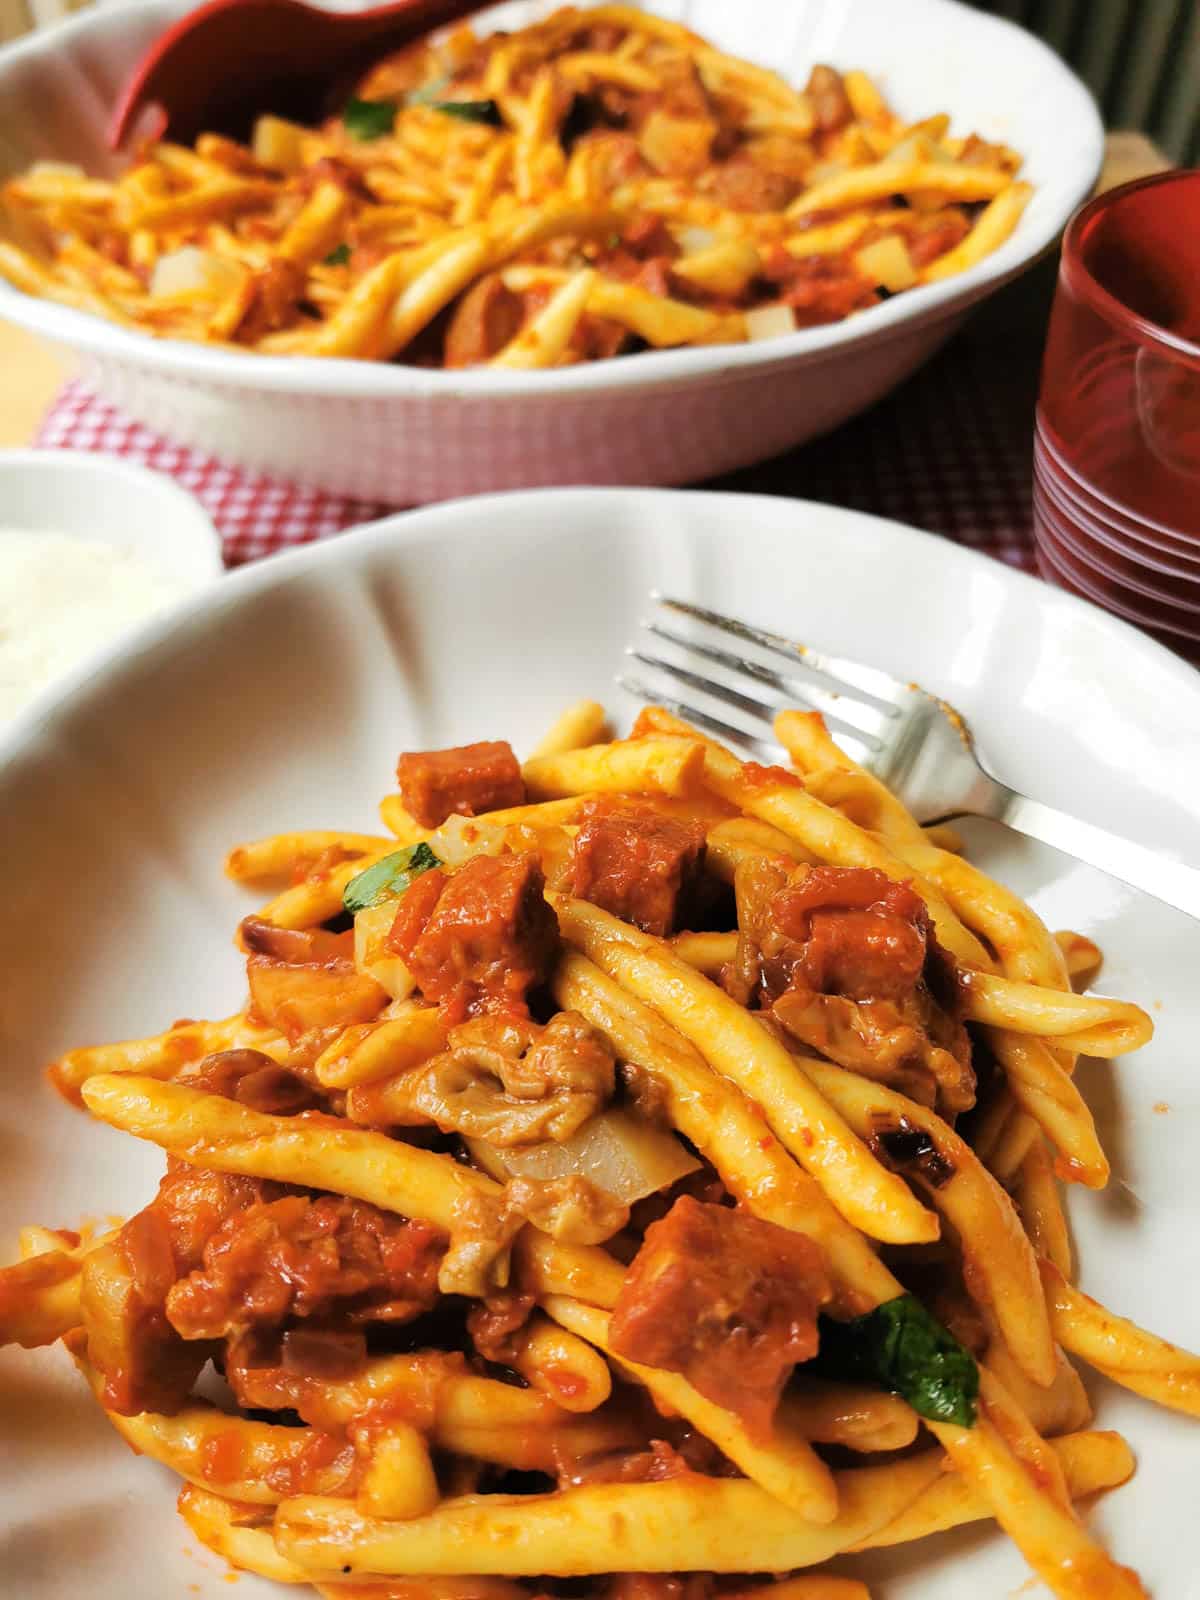 Two bowls of the spicy sausage pasta.